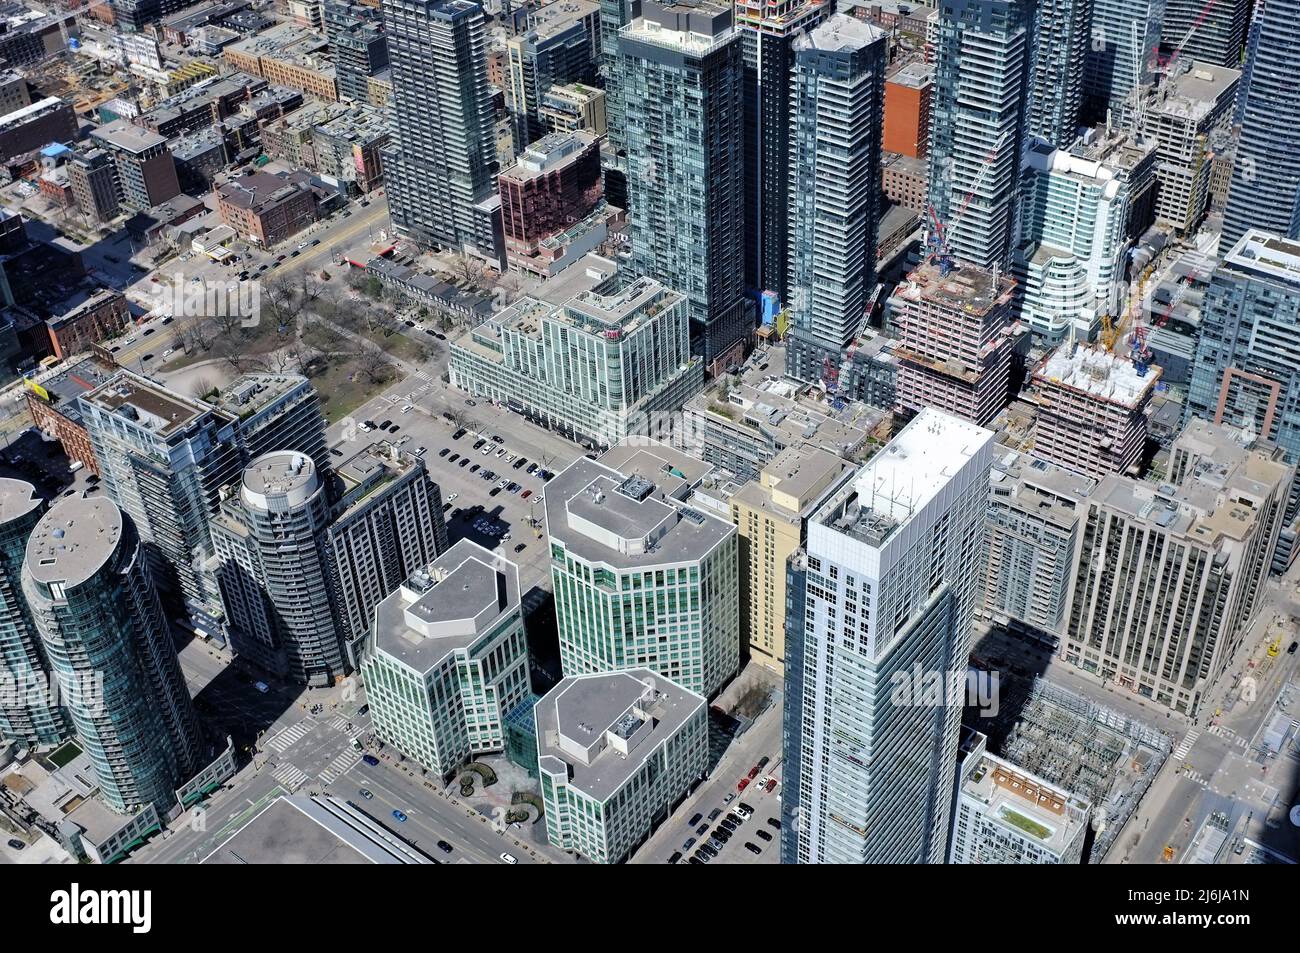 View of the city of Toronto from the CN Tower Stock Photo